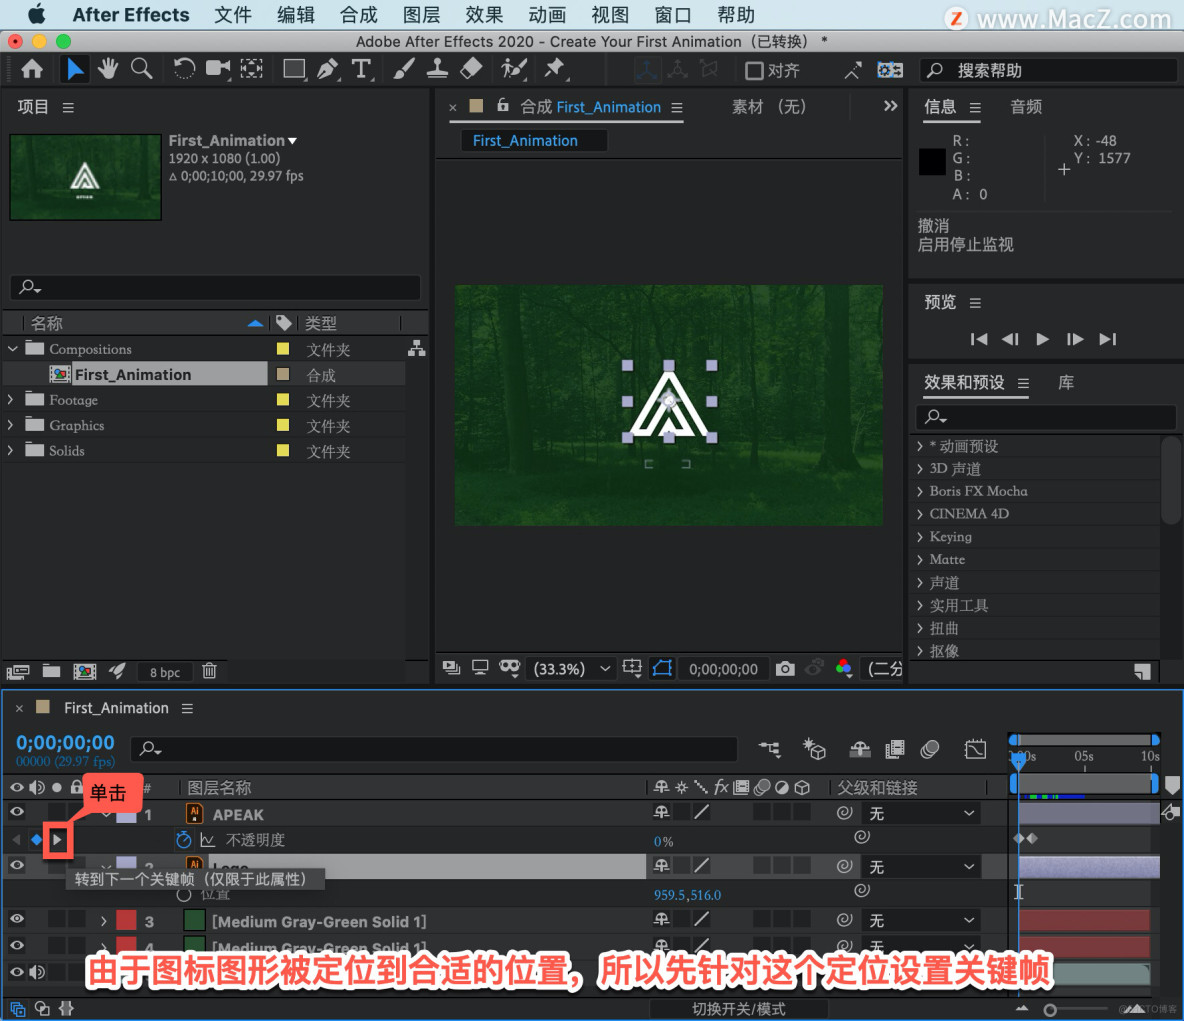 After Effects 教程，如何在 After Effects 中创建动画？_windows软件下载_02